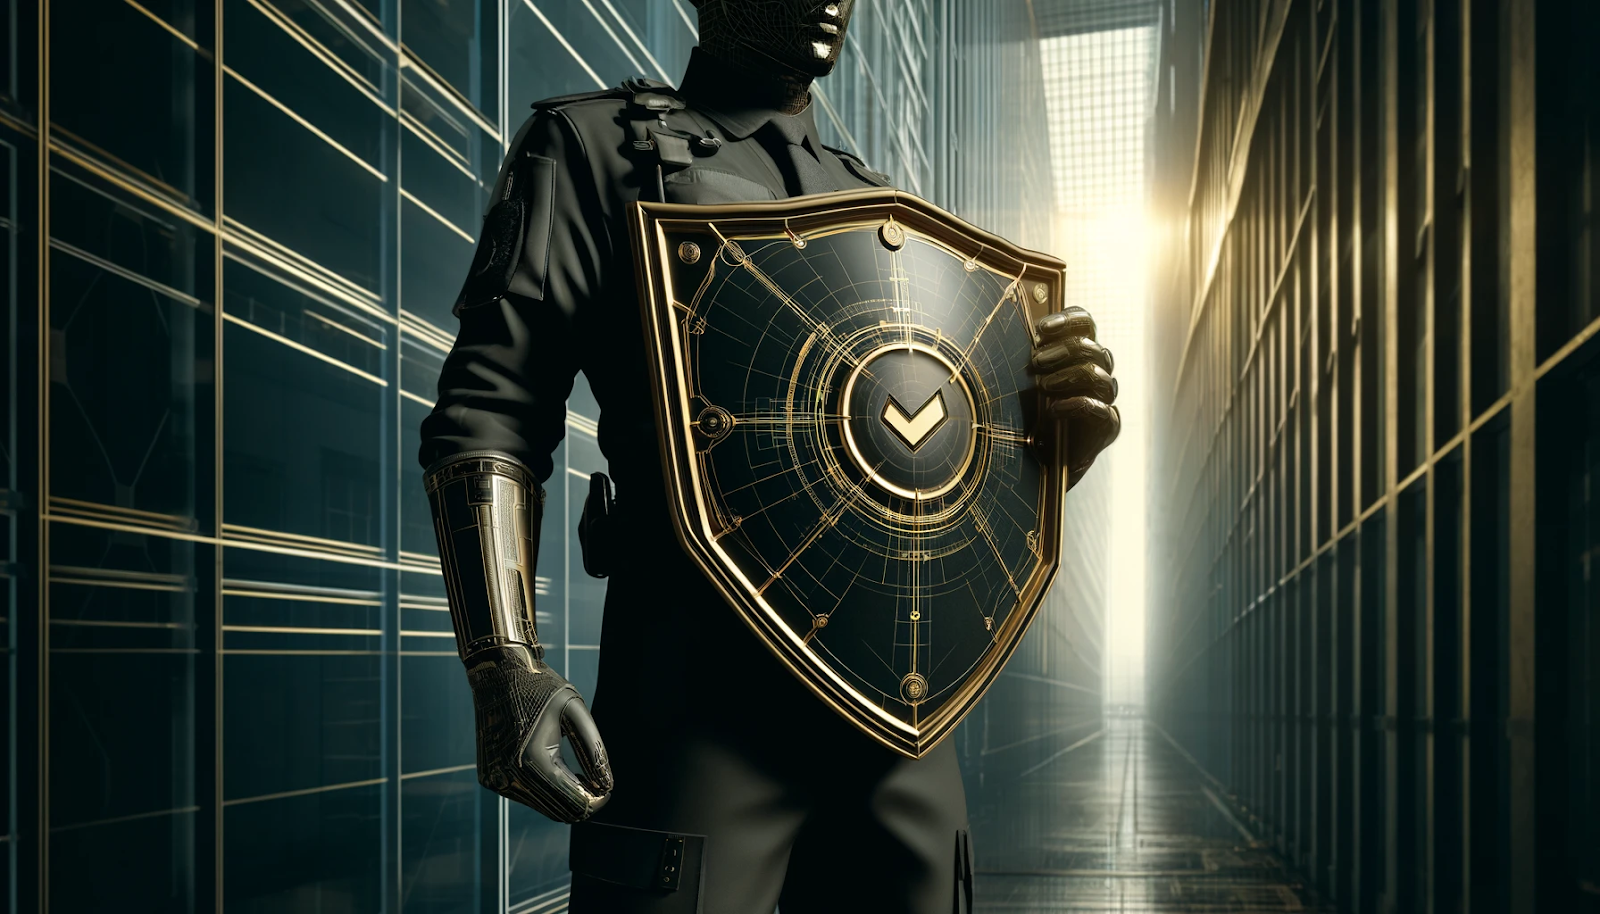 The image depicts a security guard with a vigilant stance, holding a shield, symbolizing protection and readiness. 